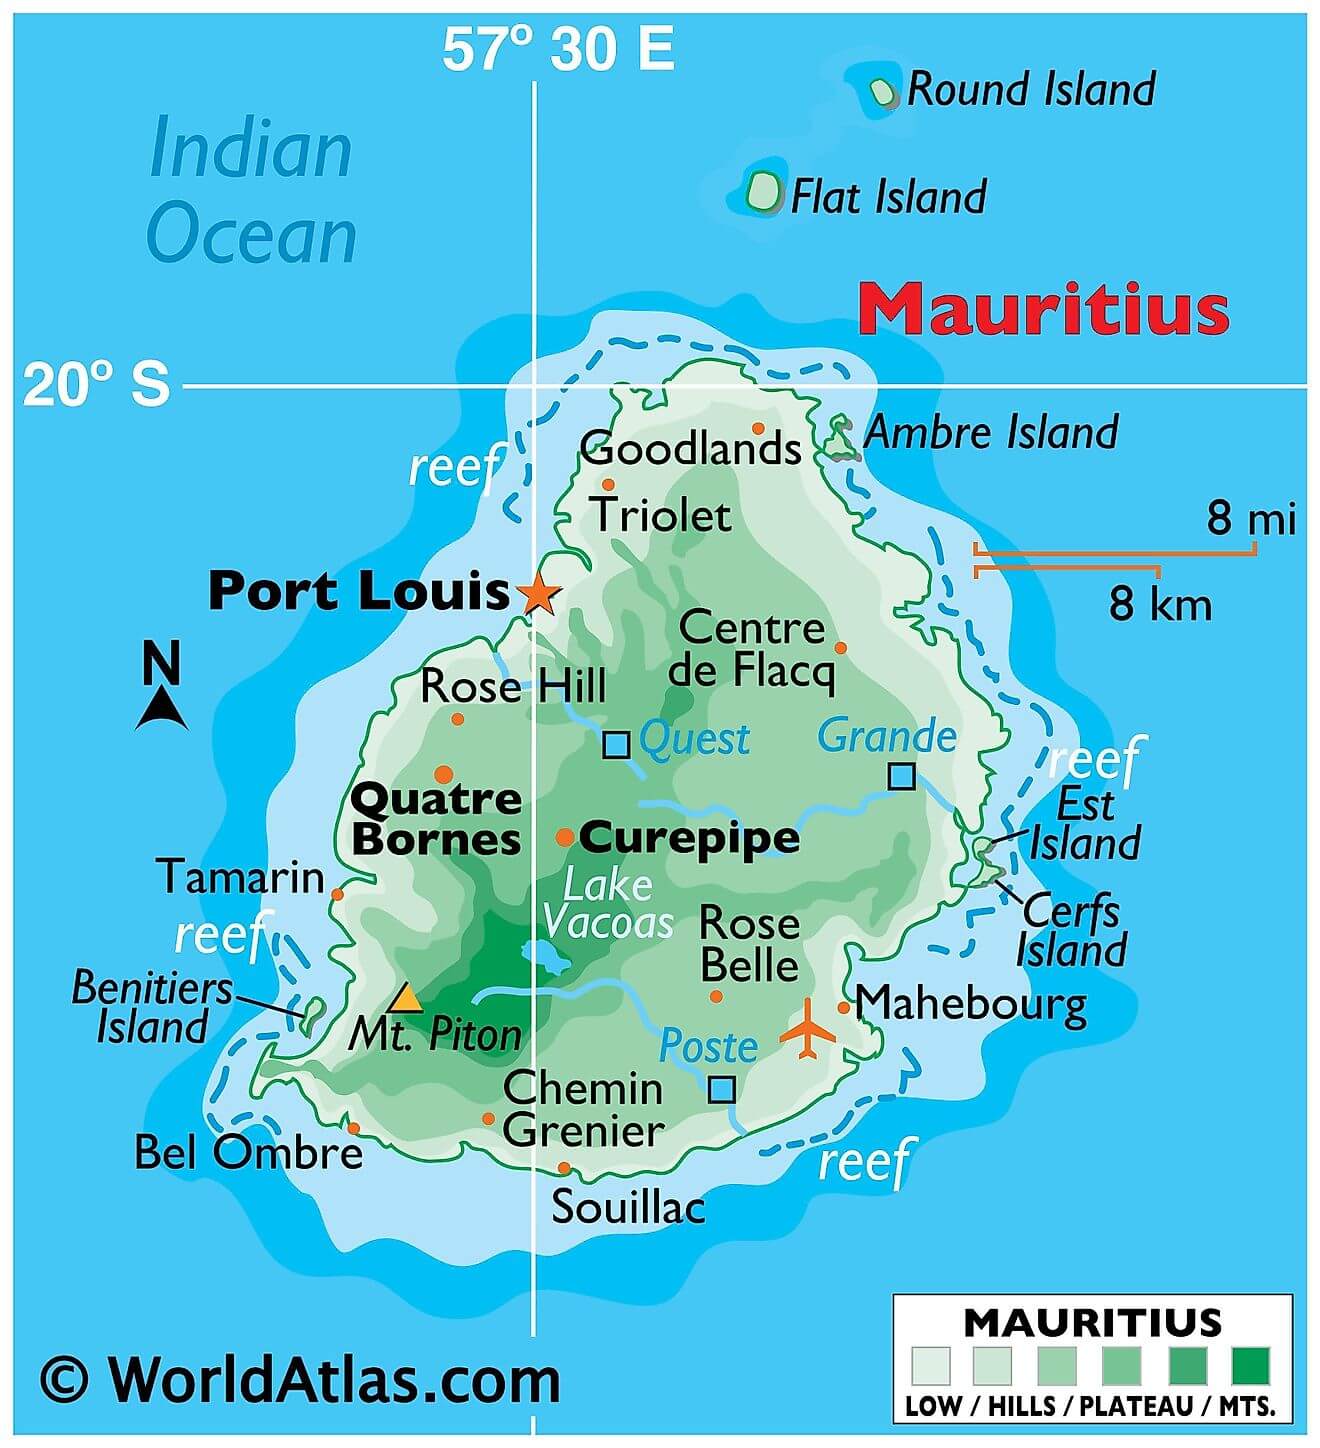 Physical Map of Mauritius